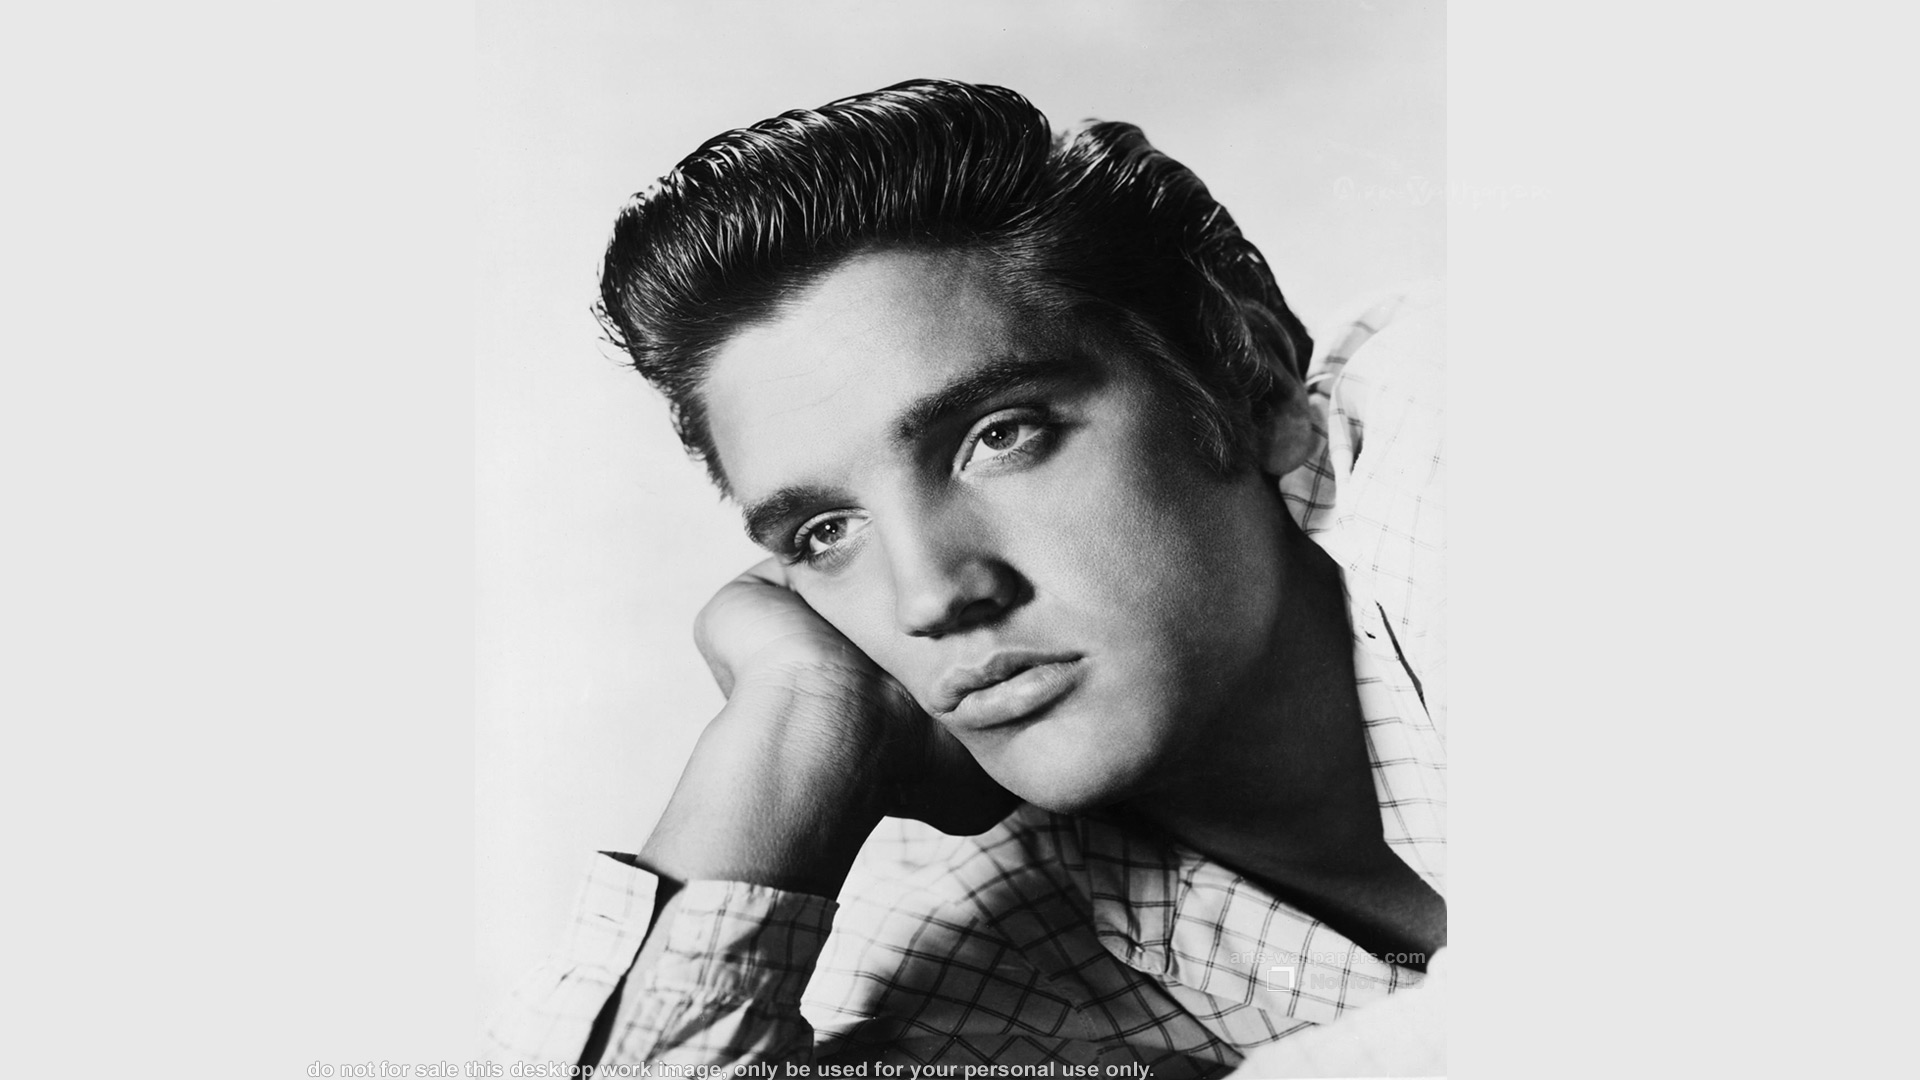 Available Resolutions For This Elvis Presley Wallpaper